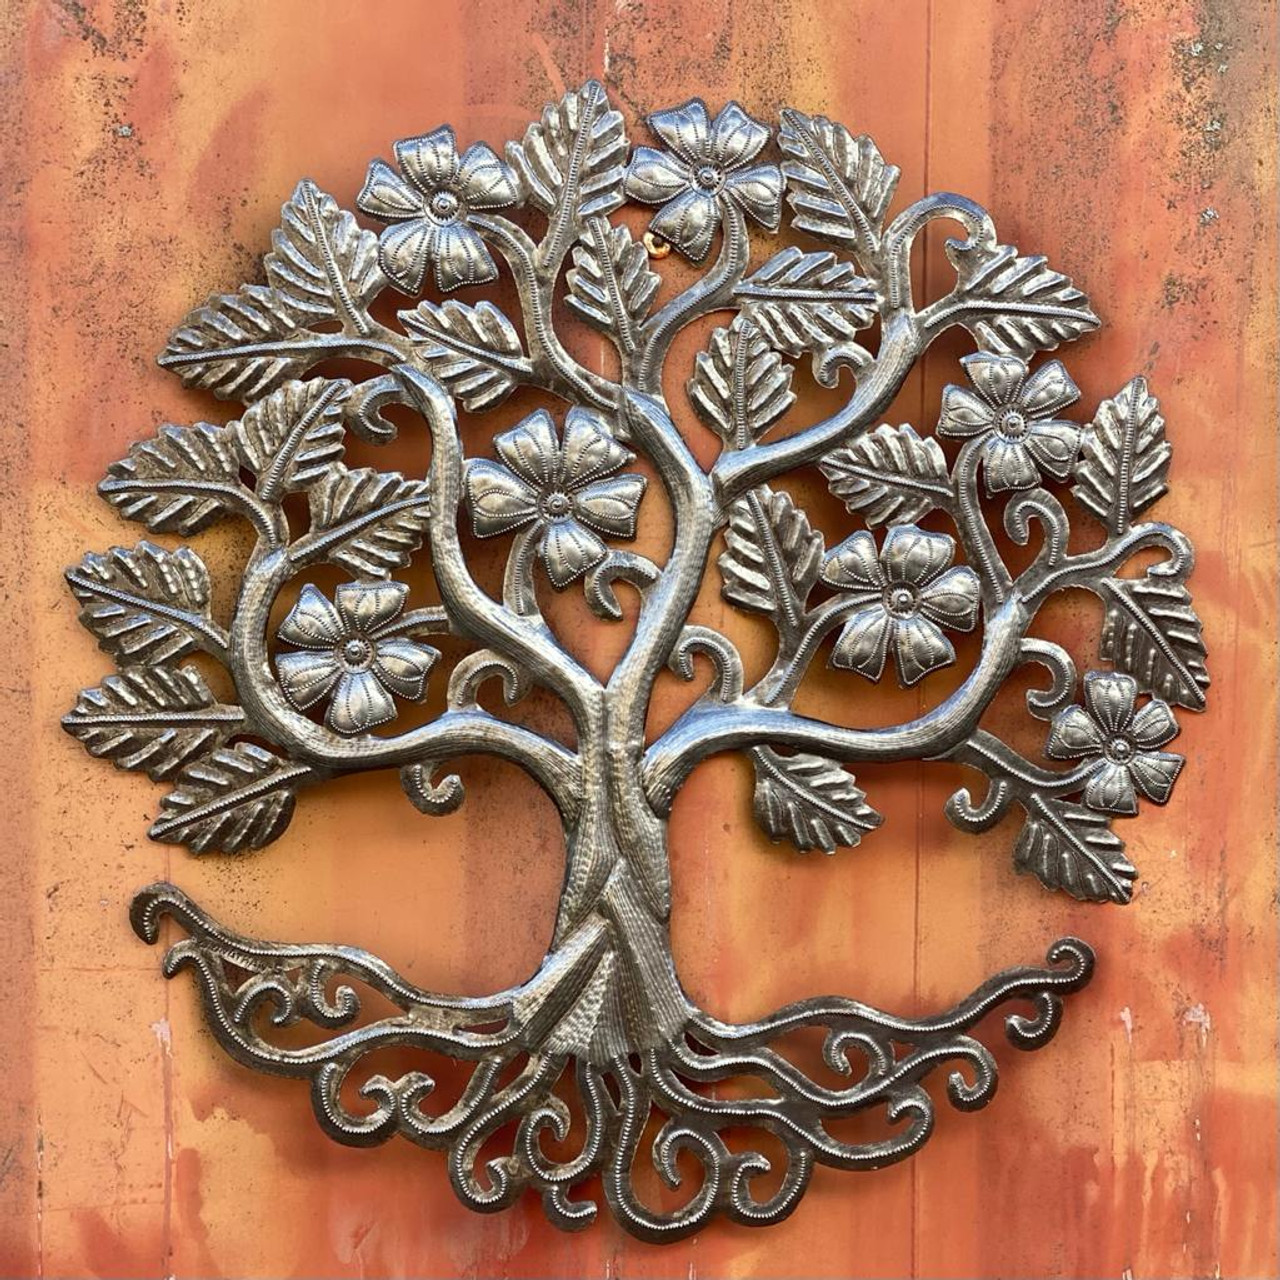 Home Decor Tree of Life with Flowers, Decorative Wall Hanging Plaque for Indoor or Outdoor, Haitian Art, 23 Inches Round…